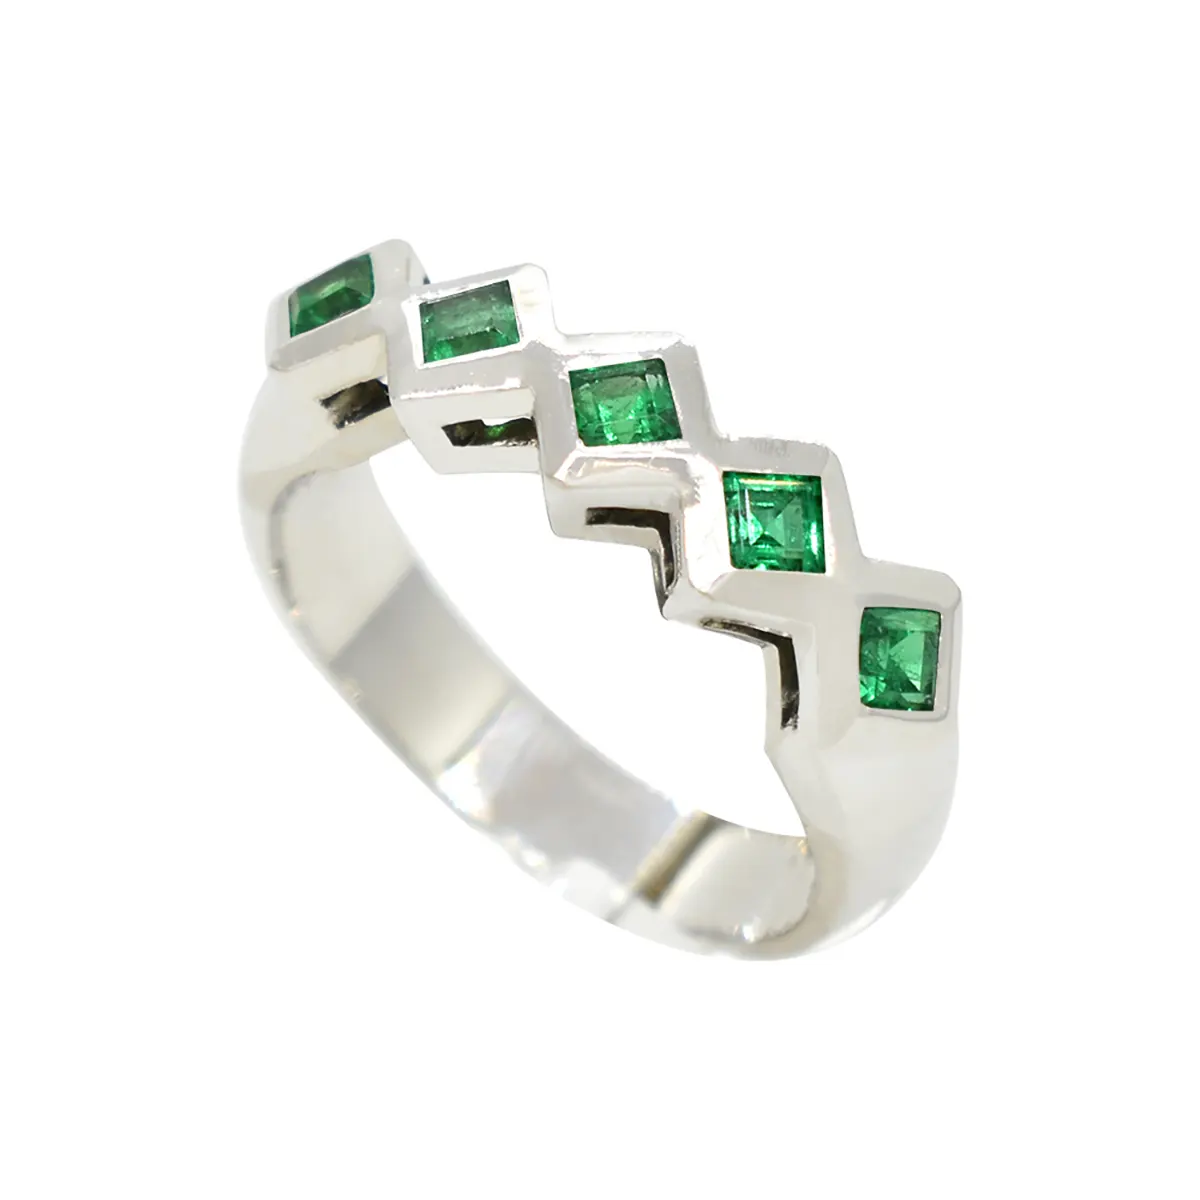 This emerald band ring features 5 brilliant green color emeralds set in wide and smooth bezels with a highly polished surface that creates a nice frame for each gem